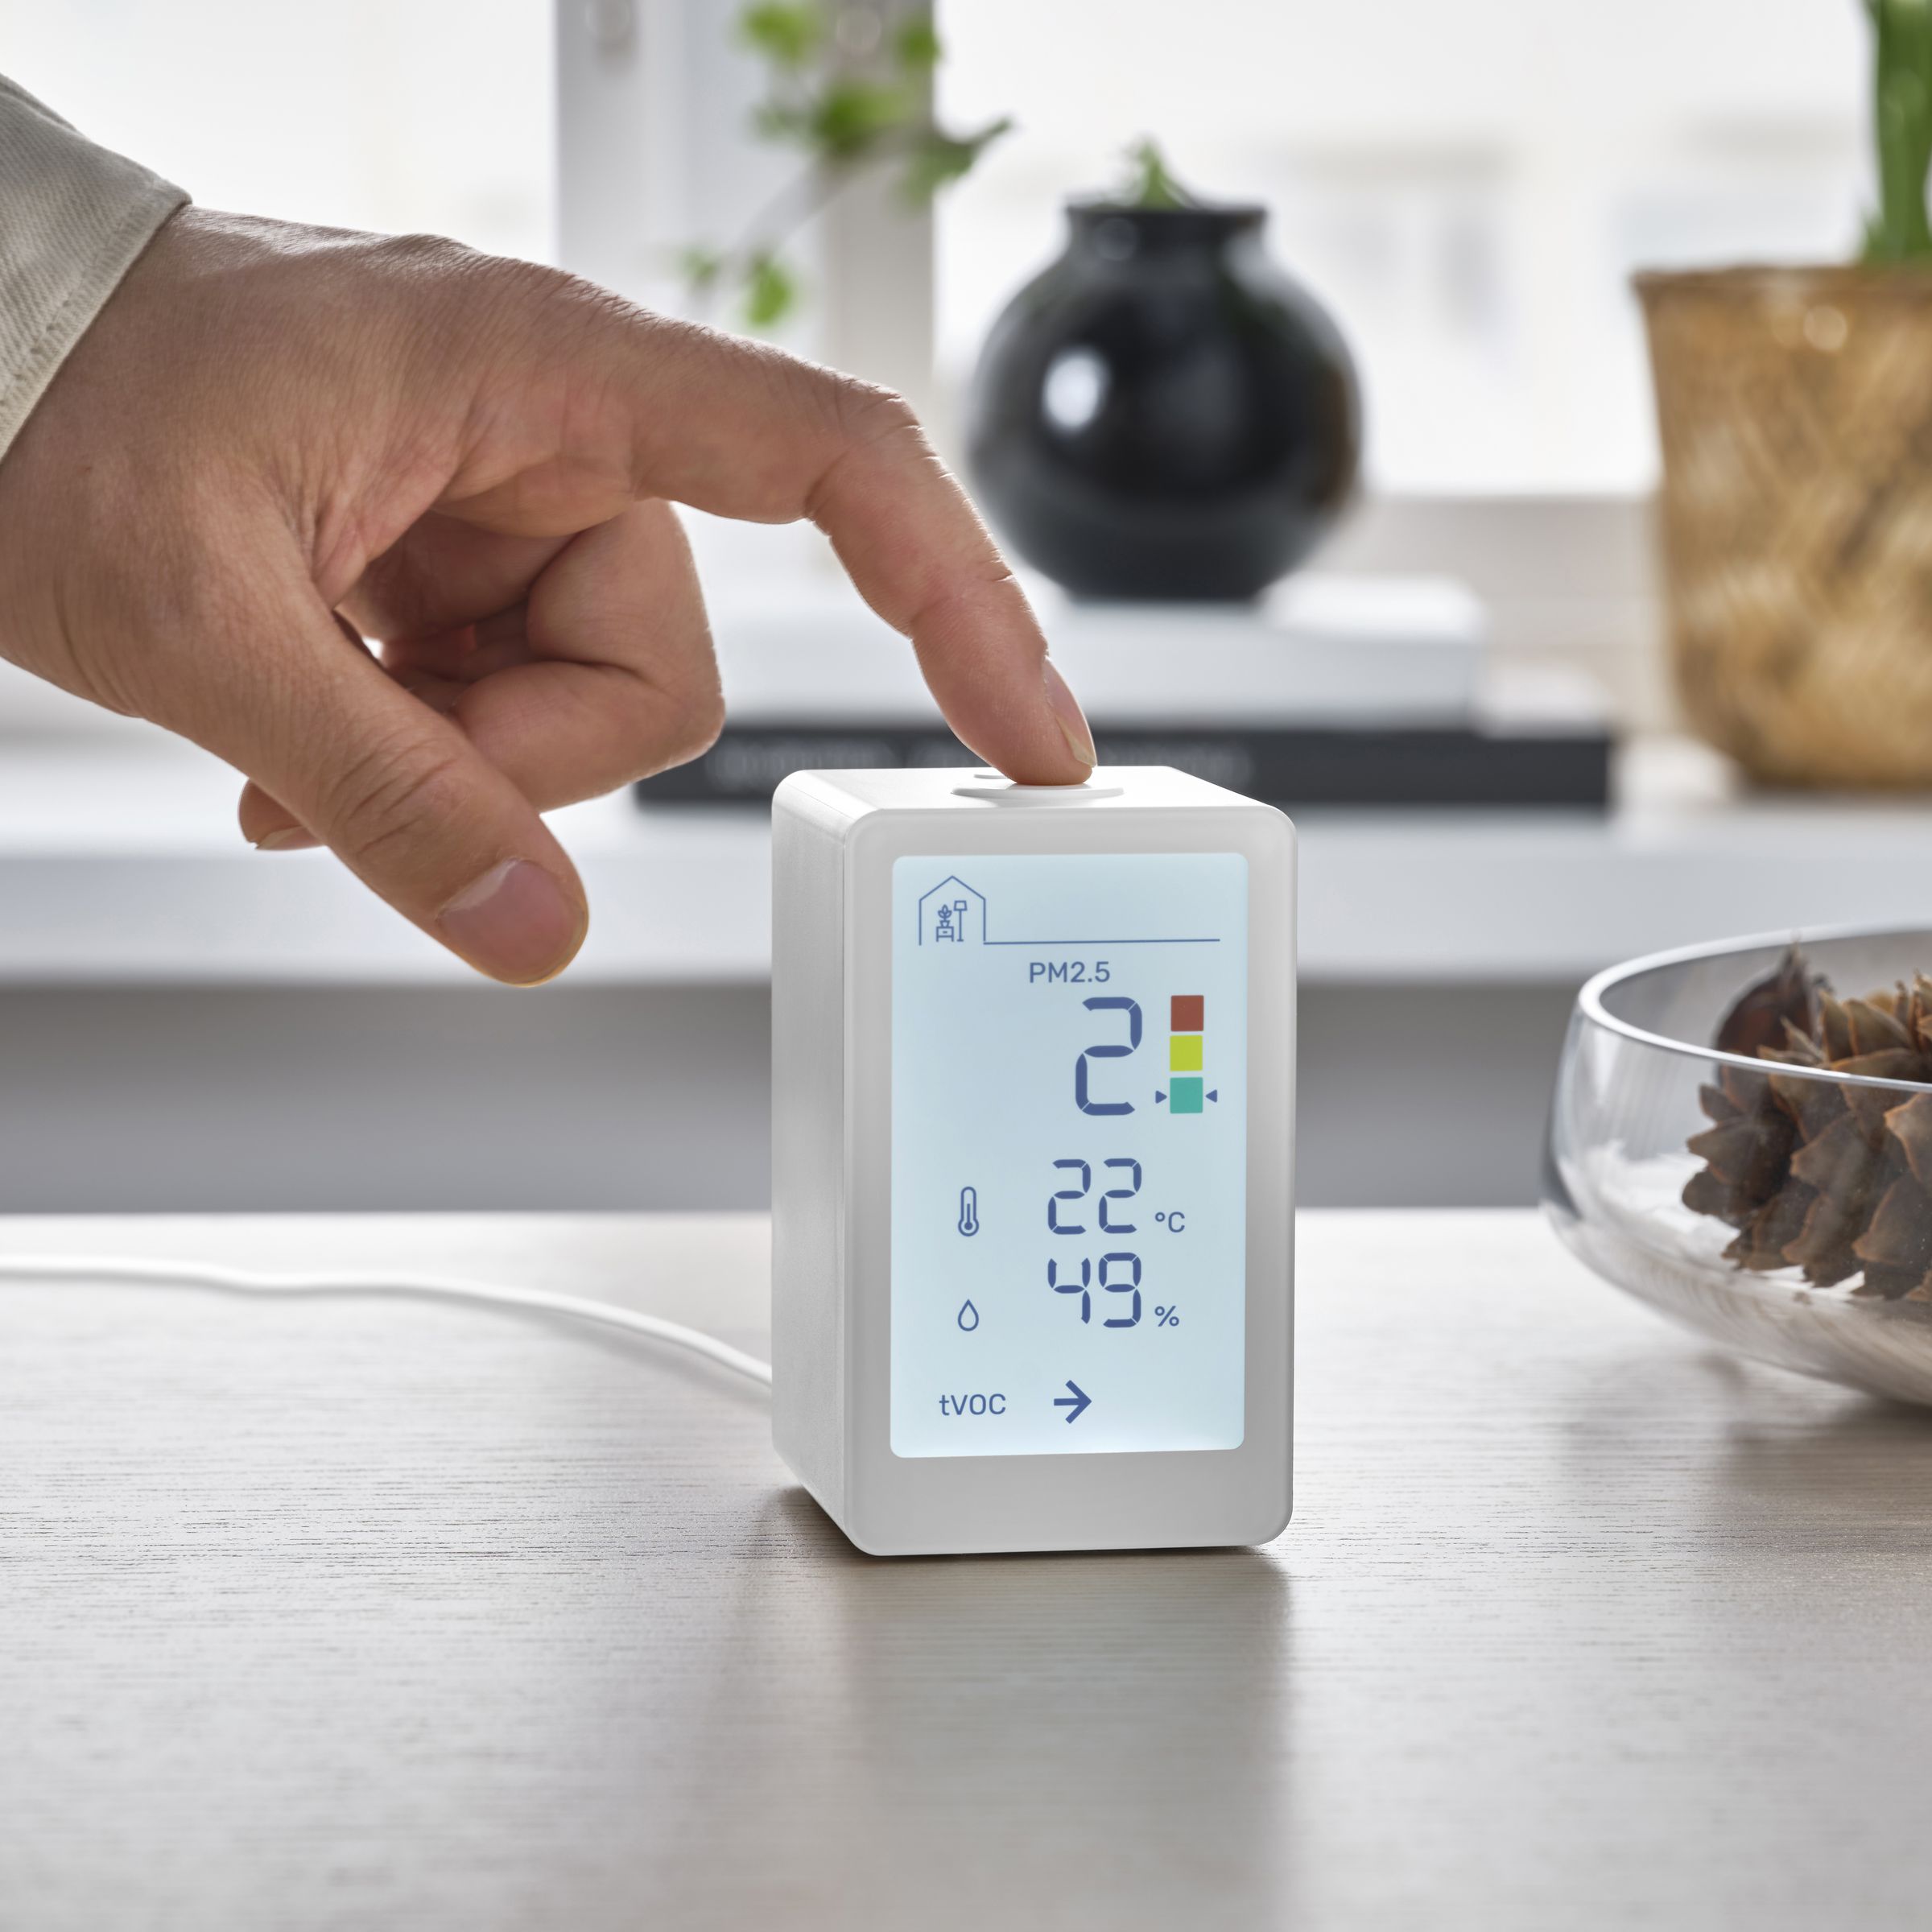 The Vindstyrka indoor air quality monitor has a large screen for seeing current temperature, humidity, and particulate matter levels.